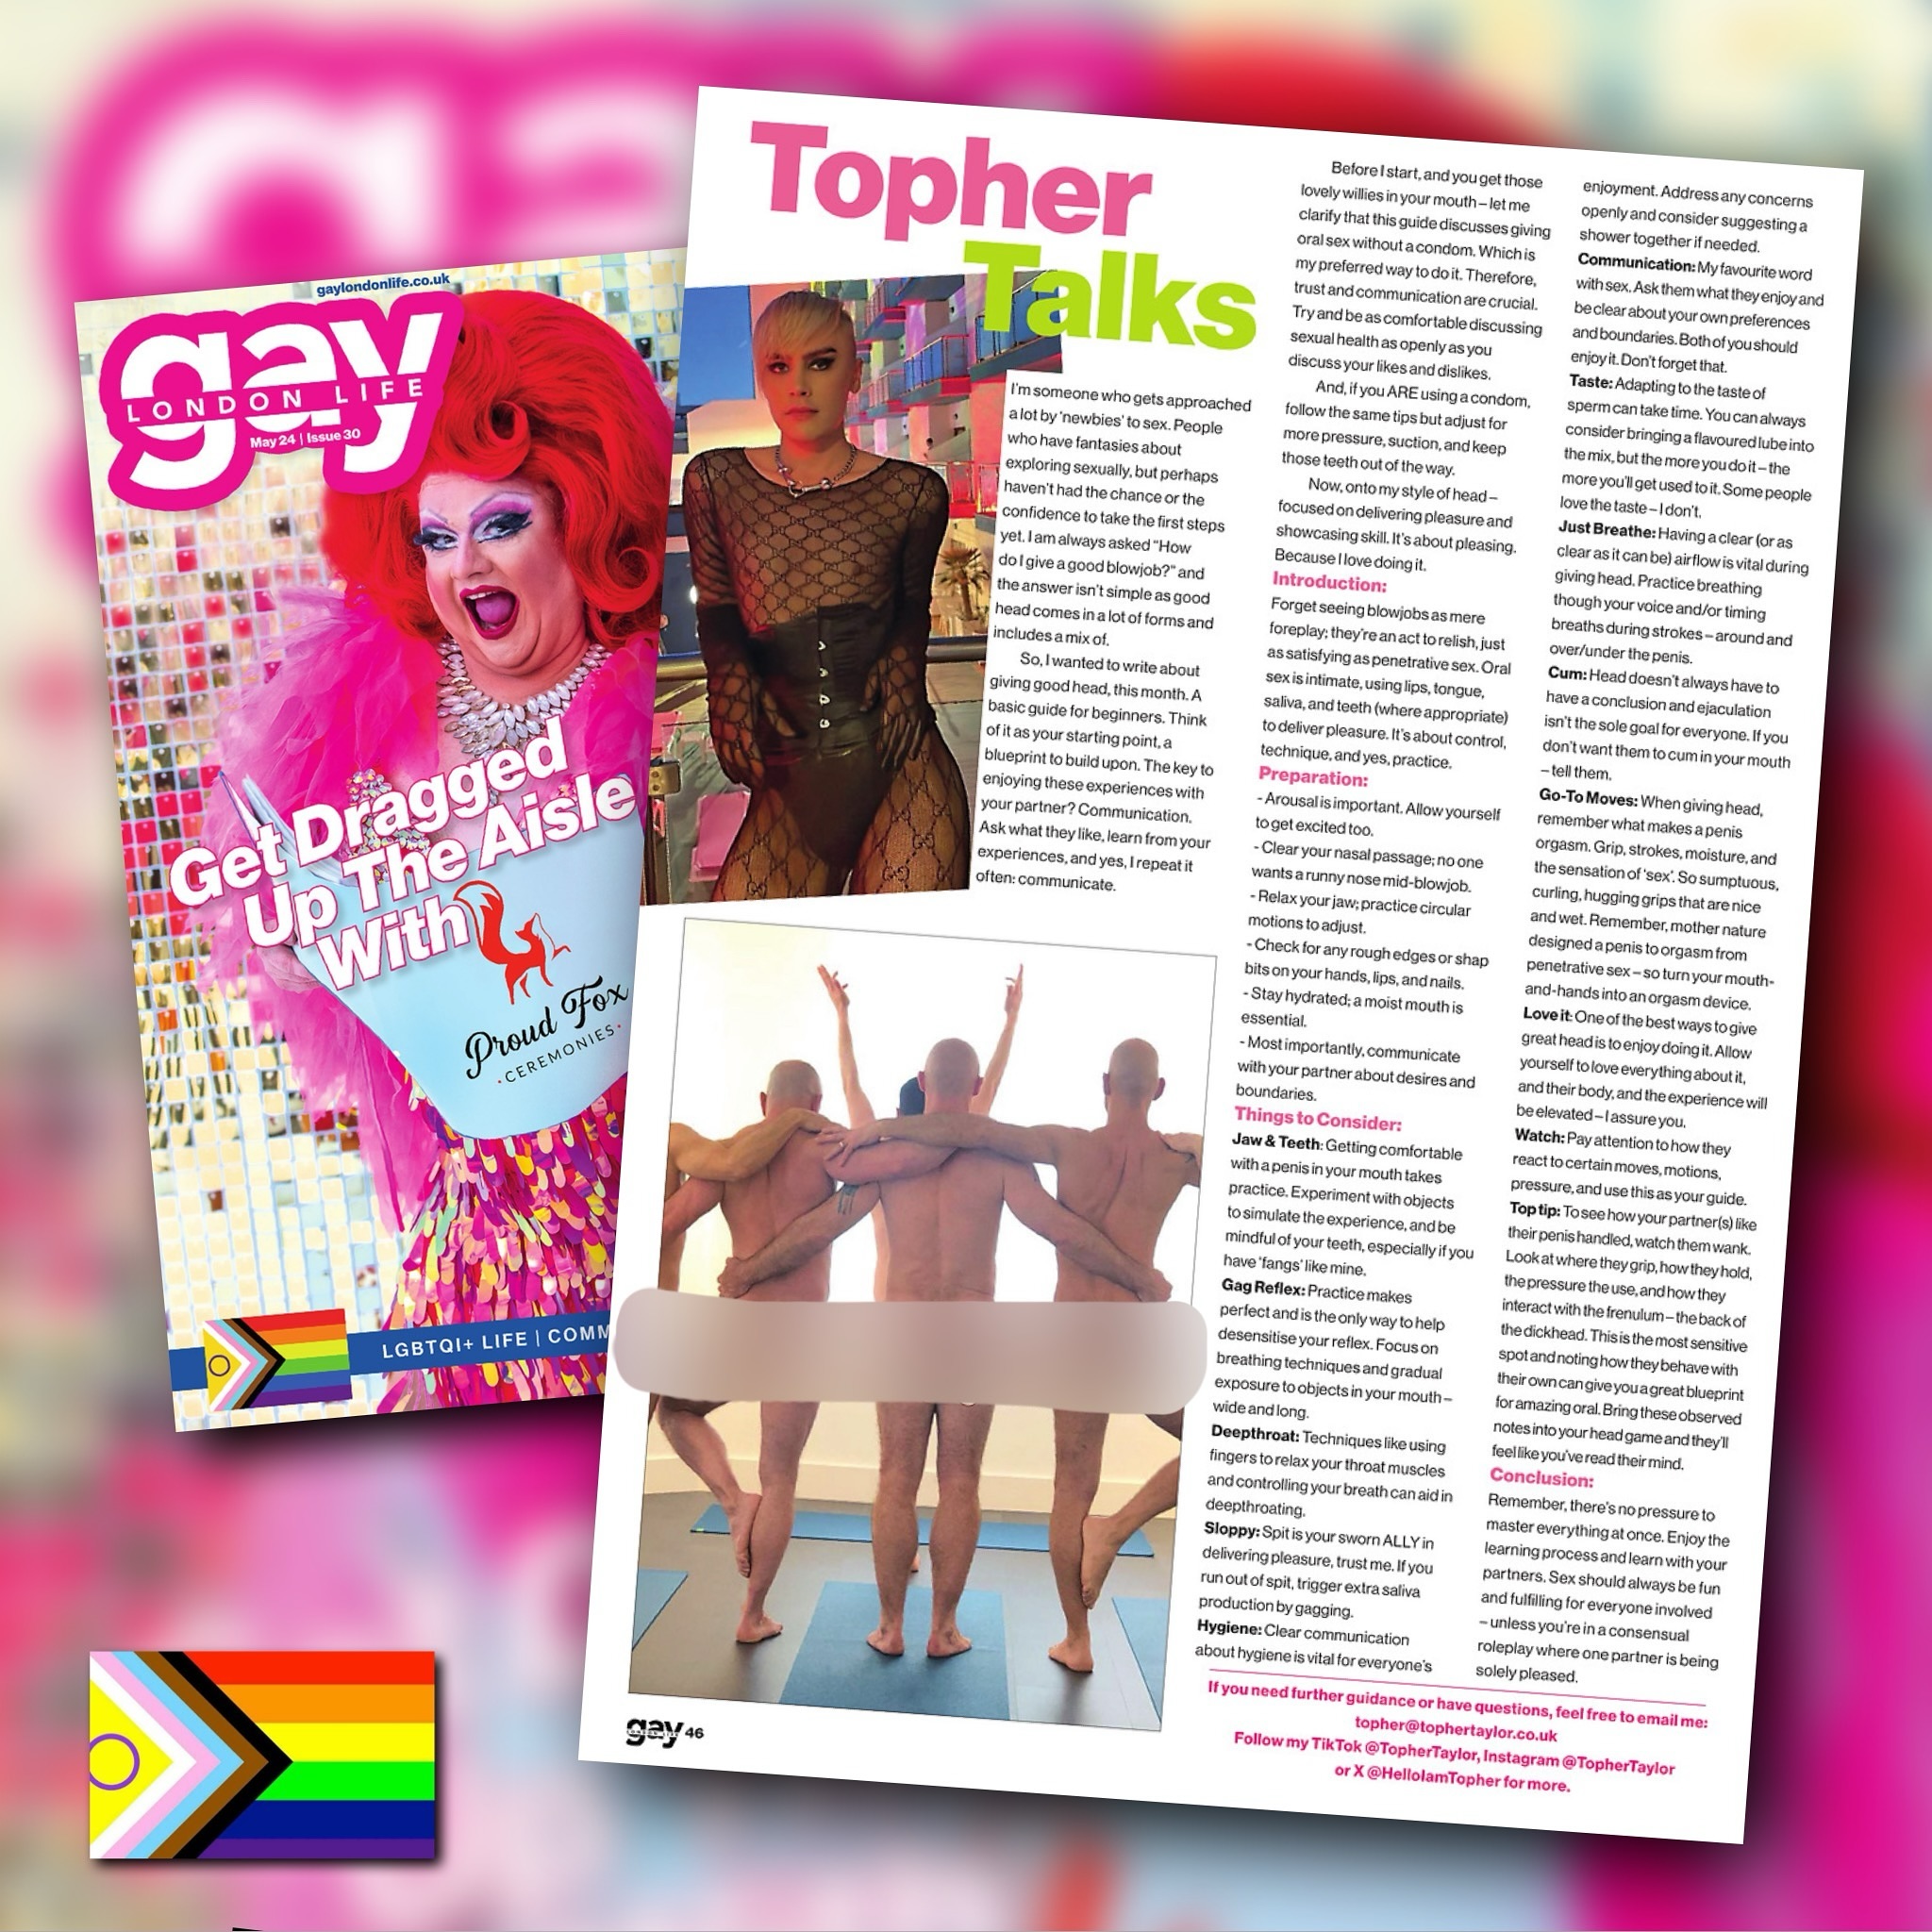 🍽️ 🍌 IF YOU LOVE DOING IT - THEY USUALLY FEEL THE LOVE! Dive throat deep into my May column for Gay London Life Magazine 👄 🍆 

Giving beginners tips & starting points for giving great slops. Get ready to please, tantalise, and please with FINESSE! 💋 

#Tips #Tricks #Pleasure #Sexuality #Queer #LGBT